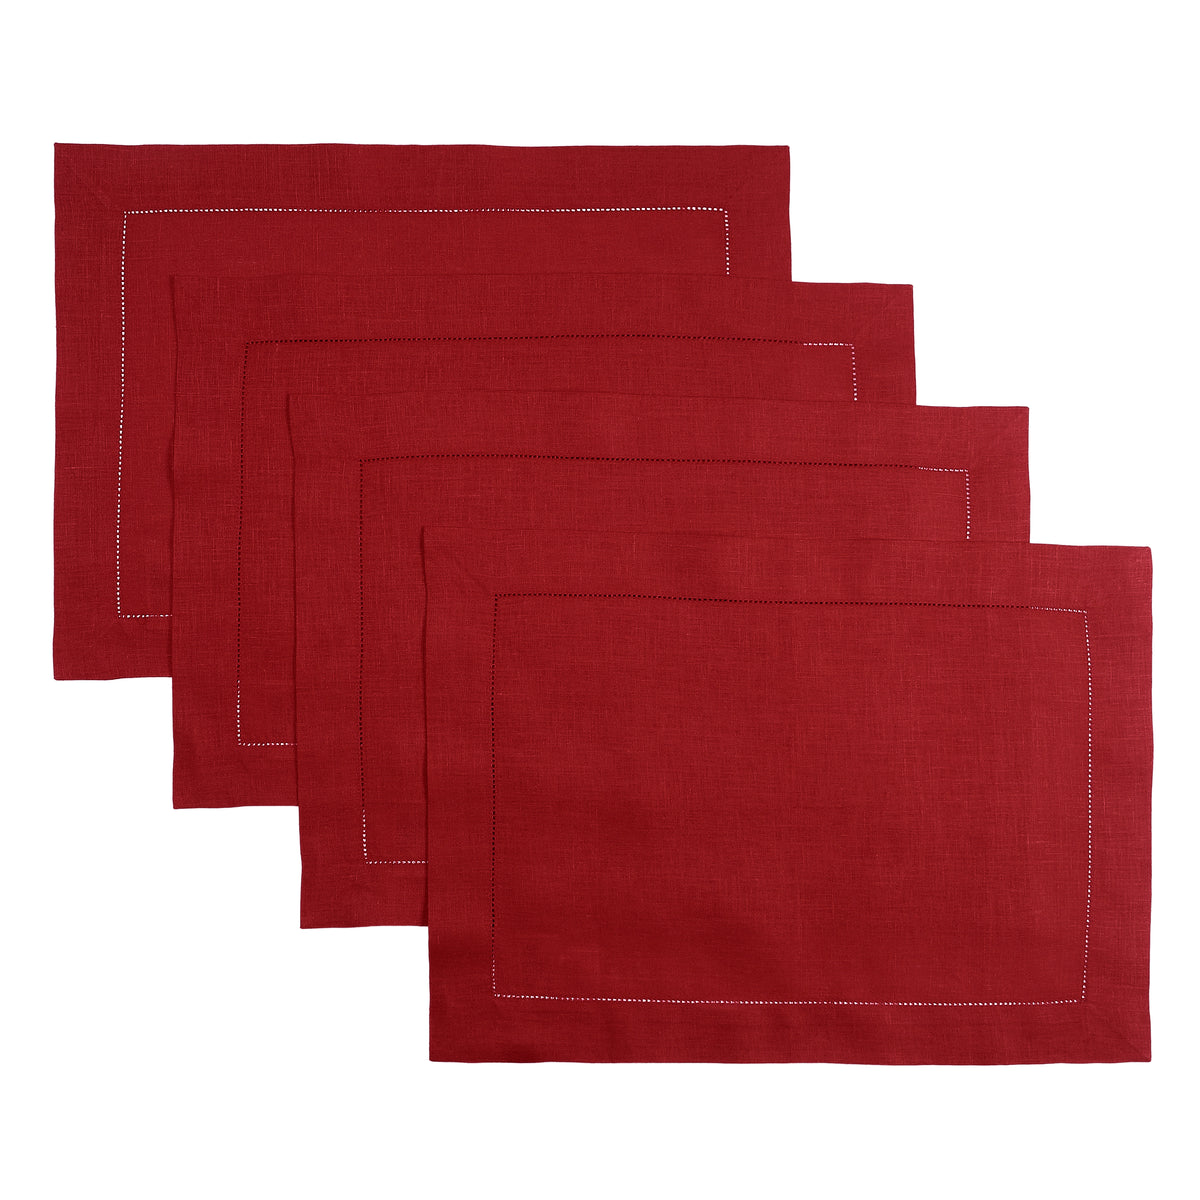 Red Linen Placemats 14 x 19 Inch Set of 4 - Hemstitch